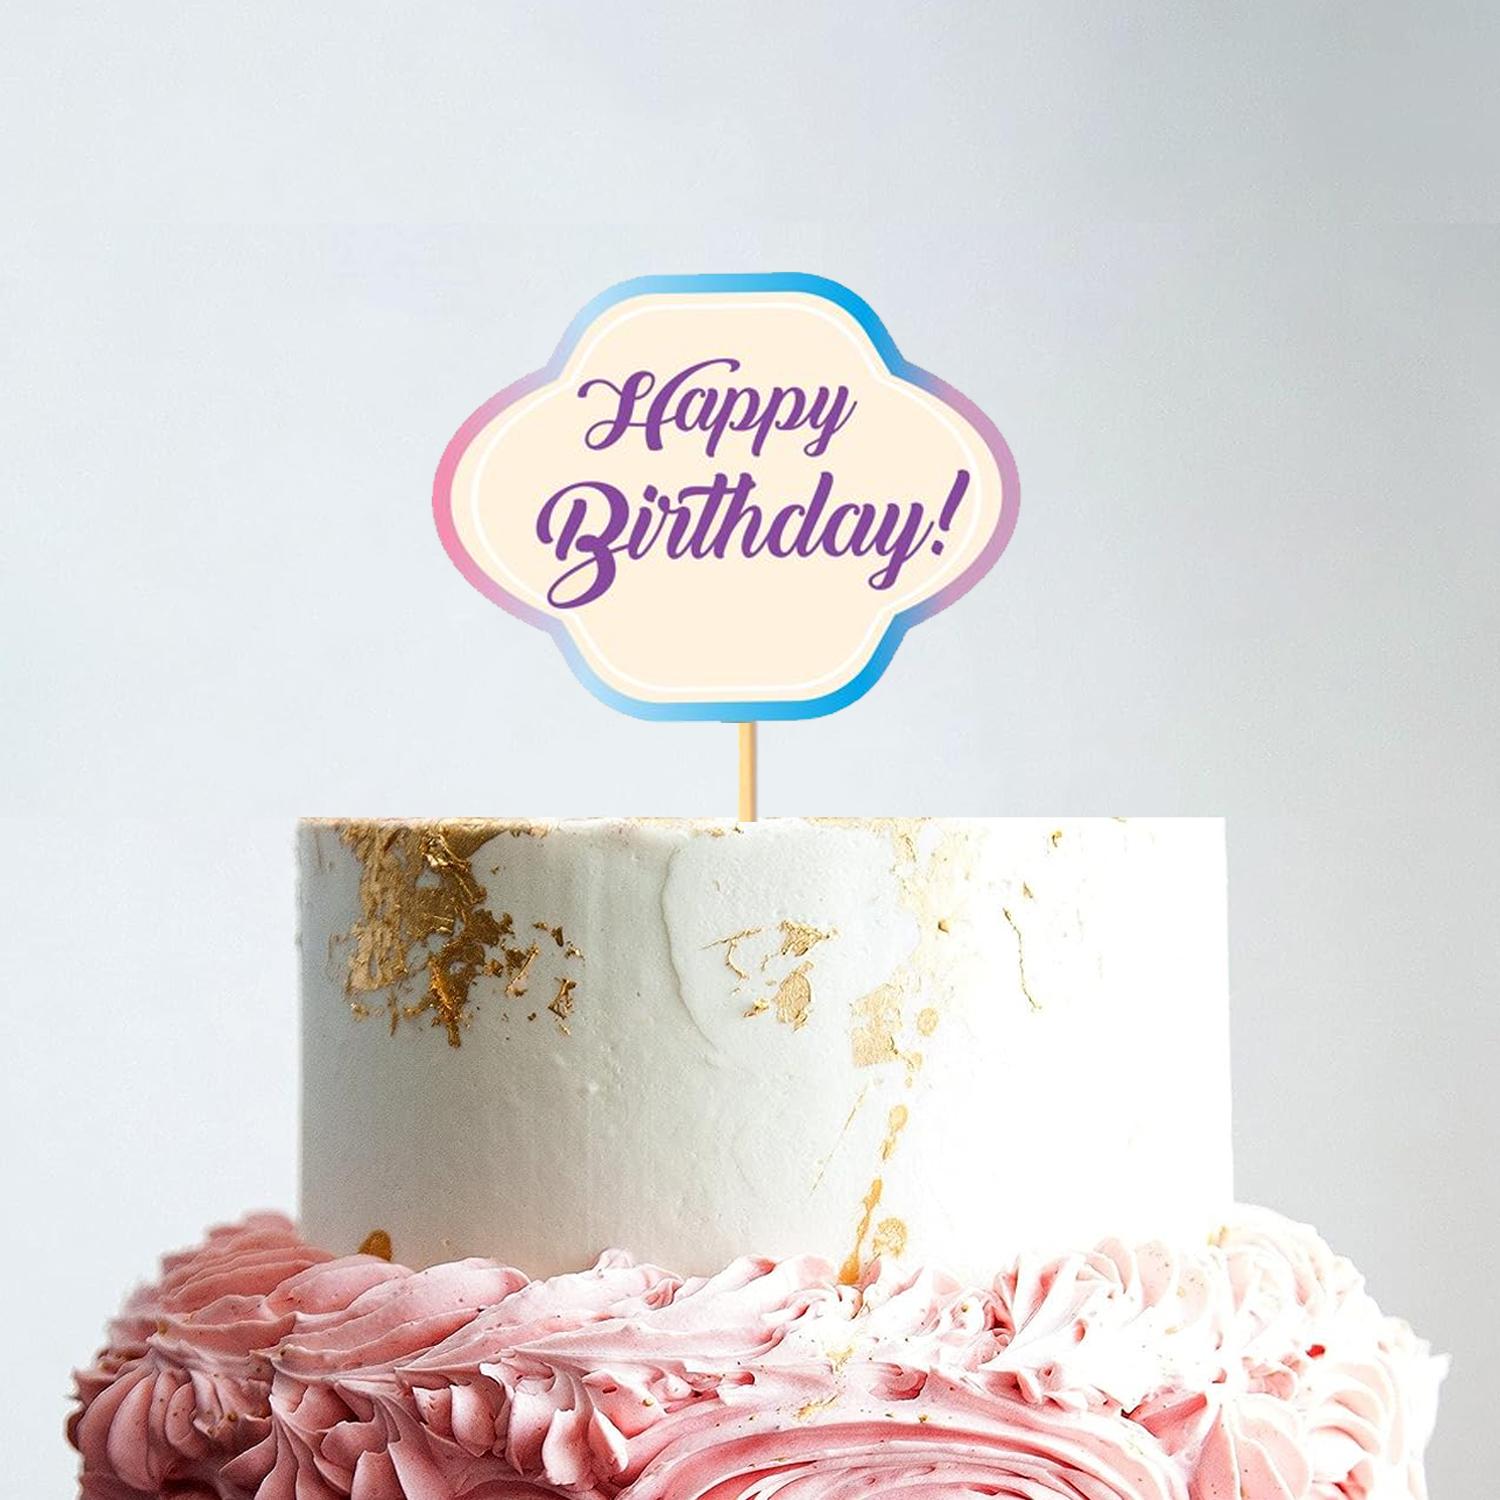 CARDSTOCK HAPPY BIRTHDAY PAPER TOPPER A5